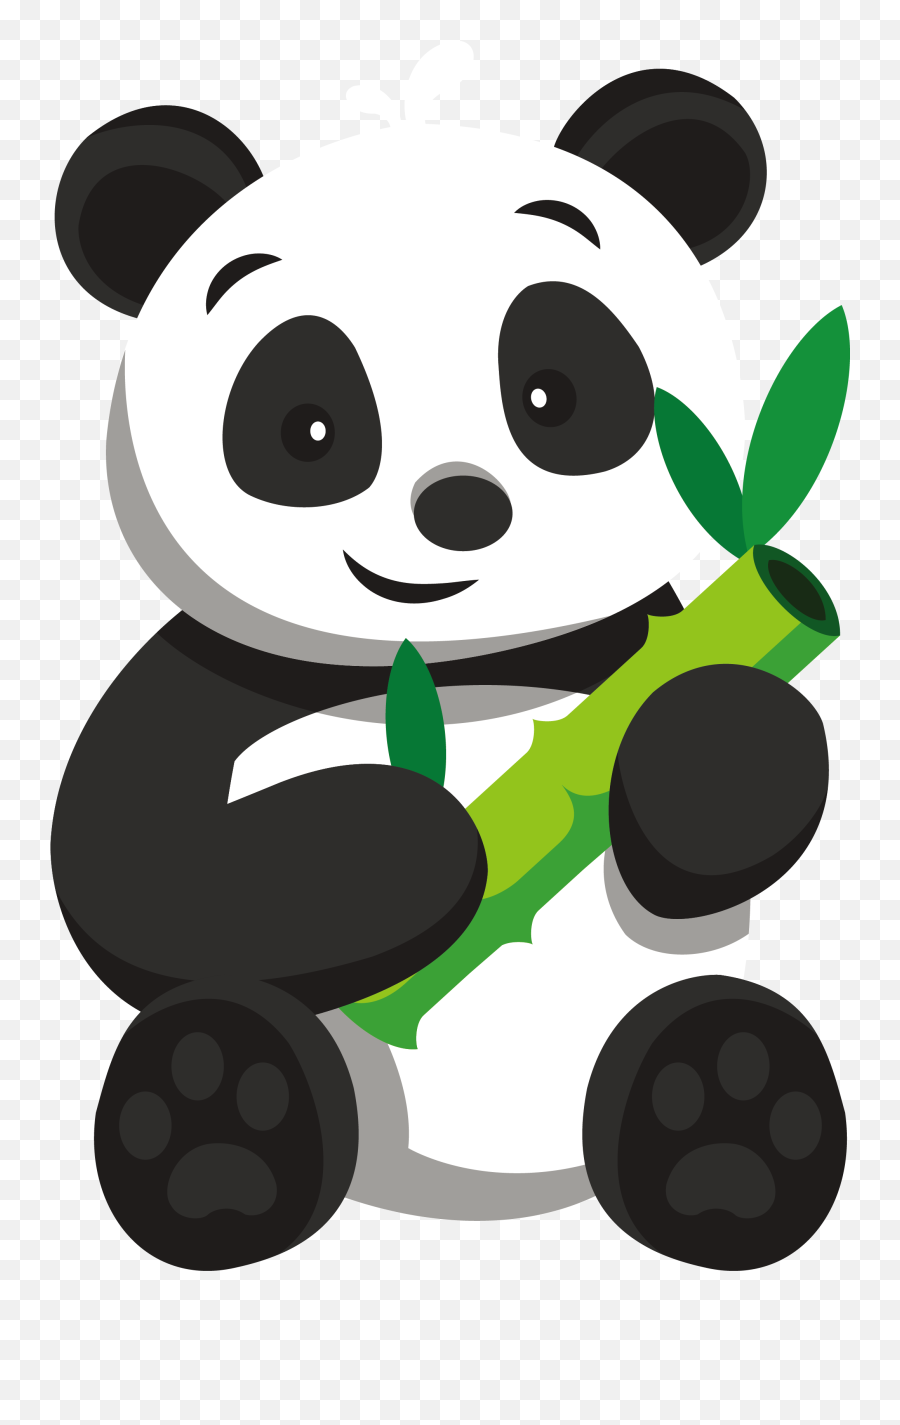 Library Of Bamboo Tree Image Png Files - Clipart Images Of Panda,Bamboo Transparent Background